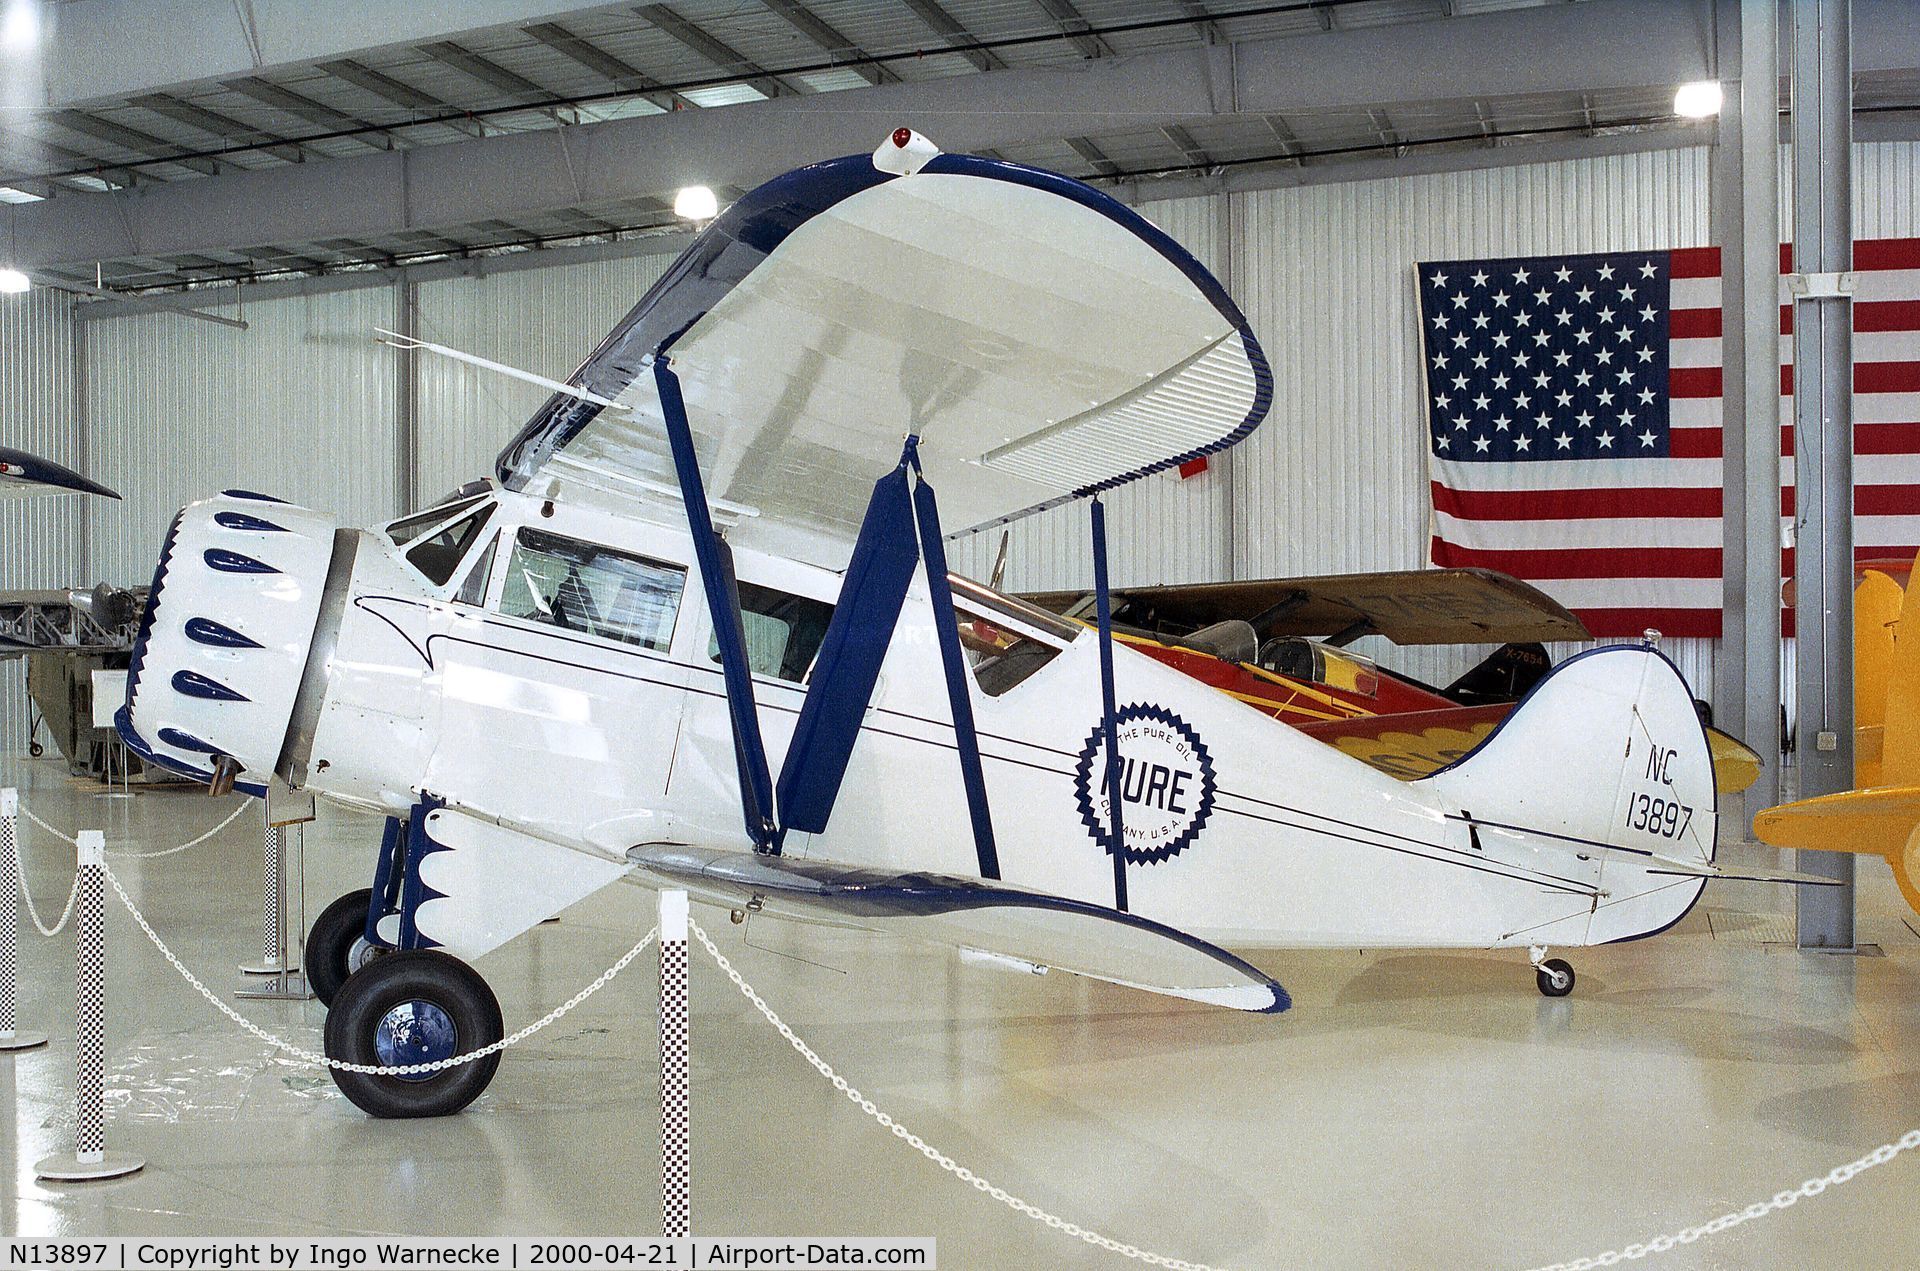 N13897, 1934 Waco UKC C/N 3842, Waco UKC at the Golden Wings Flying Museum, Blaine MN